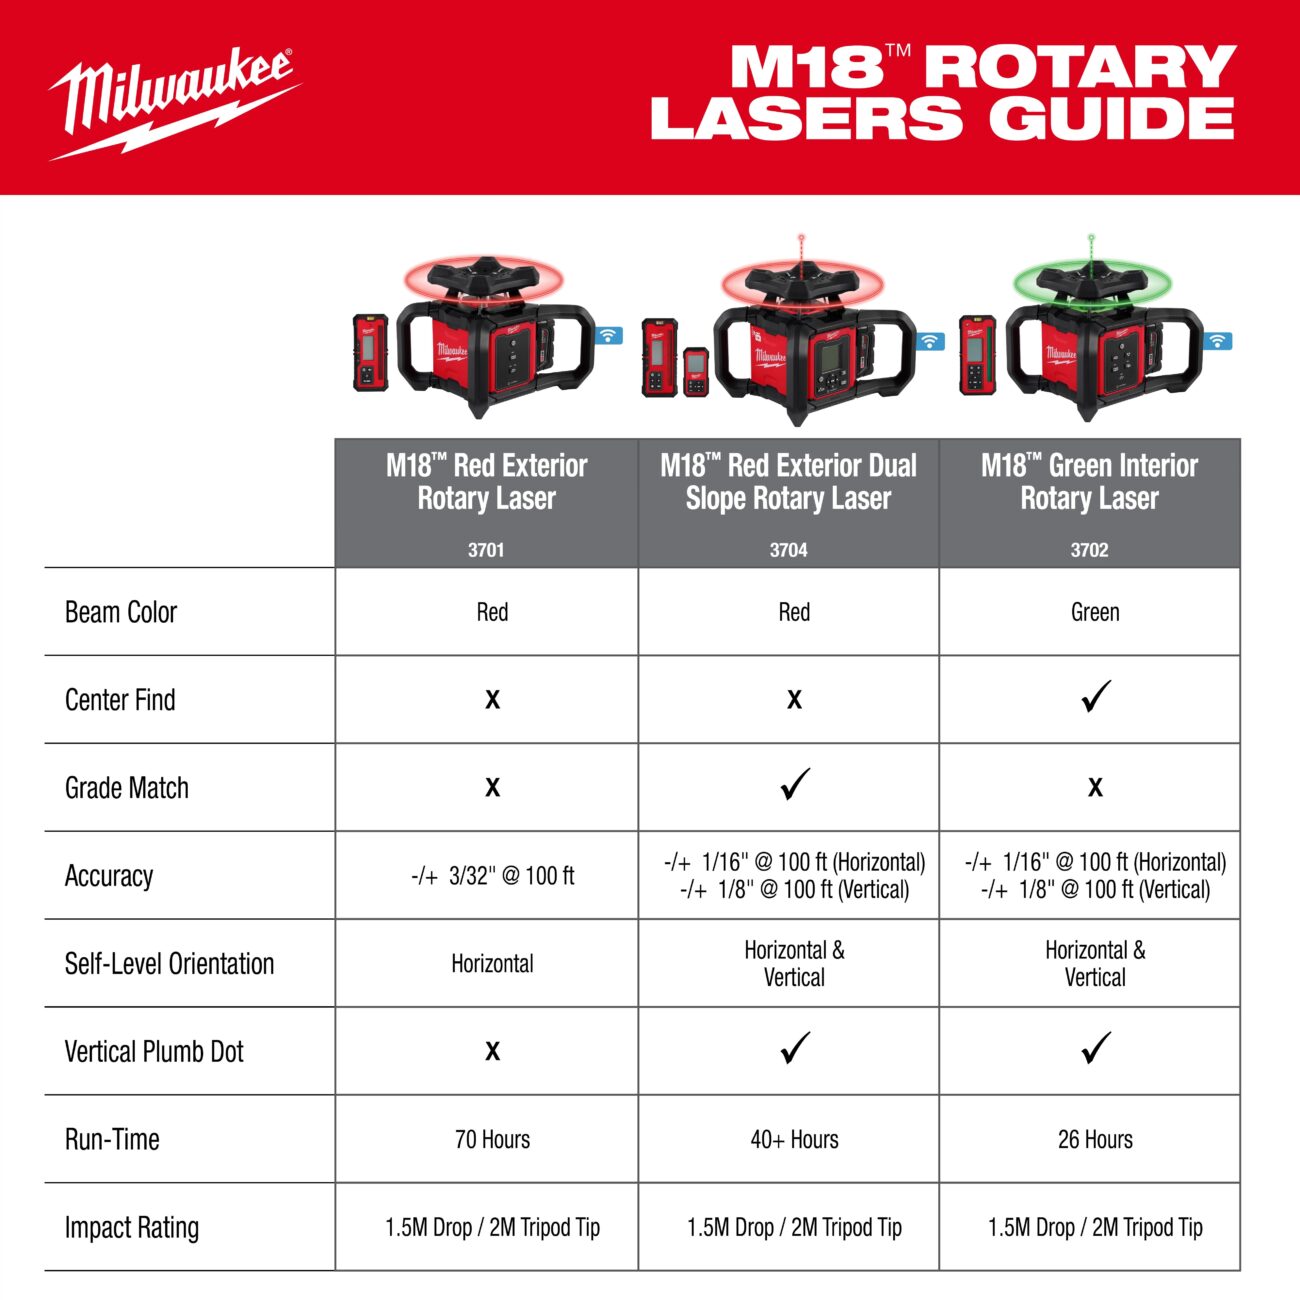 M18 Rotary Lasers